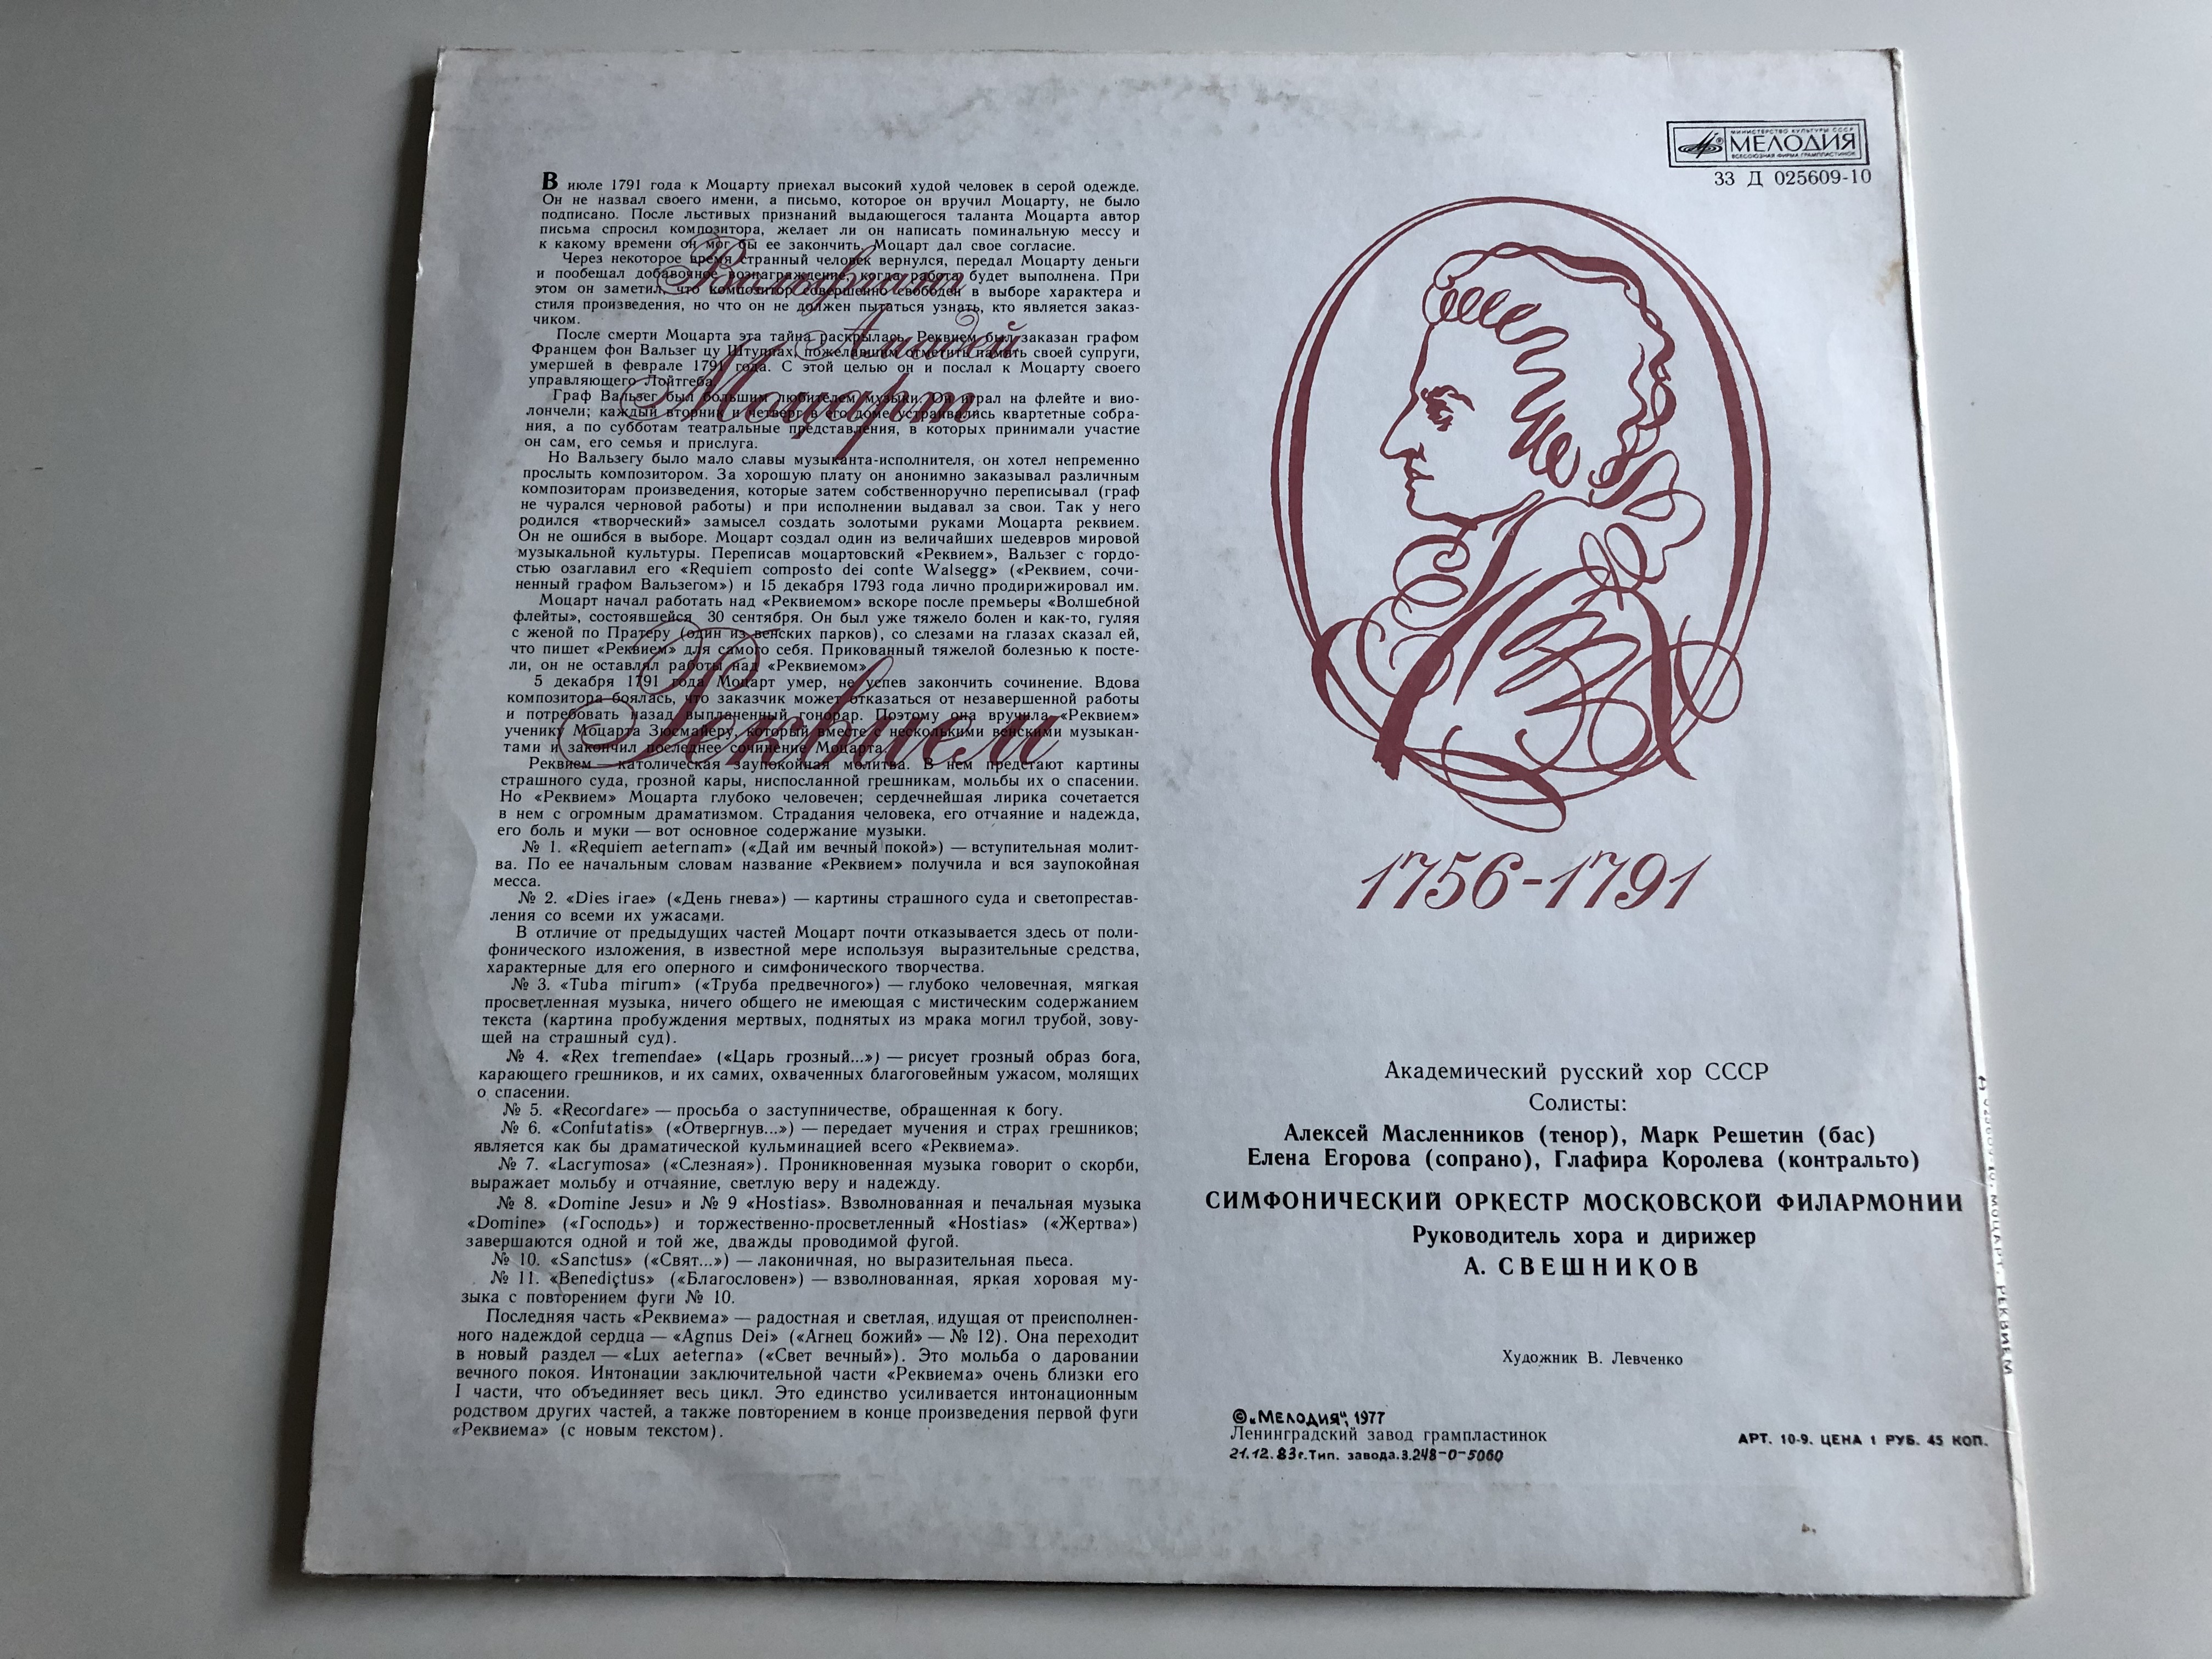 wolfgang-amadeus-mozart-requiem-state-academic-russian-chorus-of-the-ussr-moscow-state-philharmonic-orchestra-conducted-a.-sveshnikov-lp-33-025609-10-2-.jpg